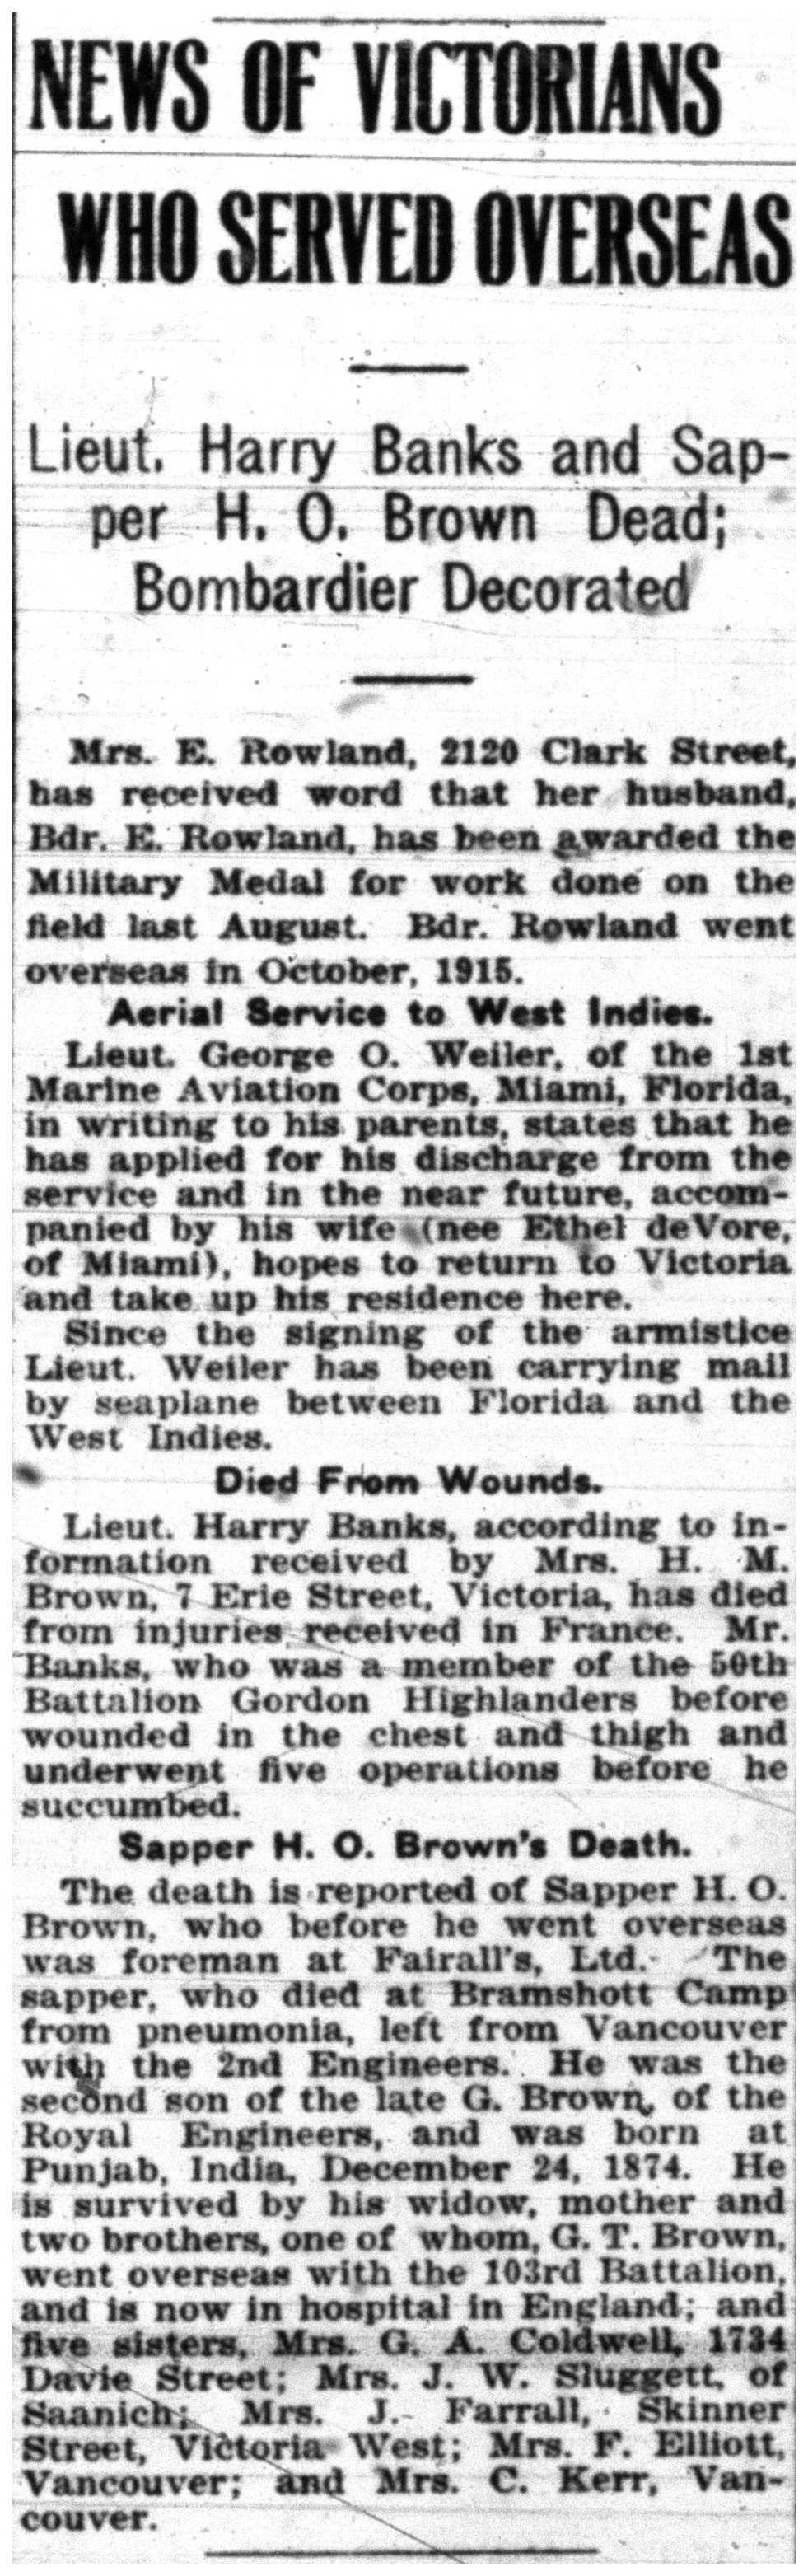 "News of Victorians Who Served Overseas"